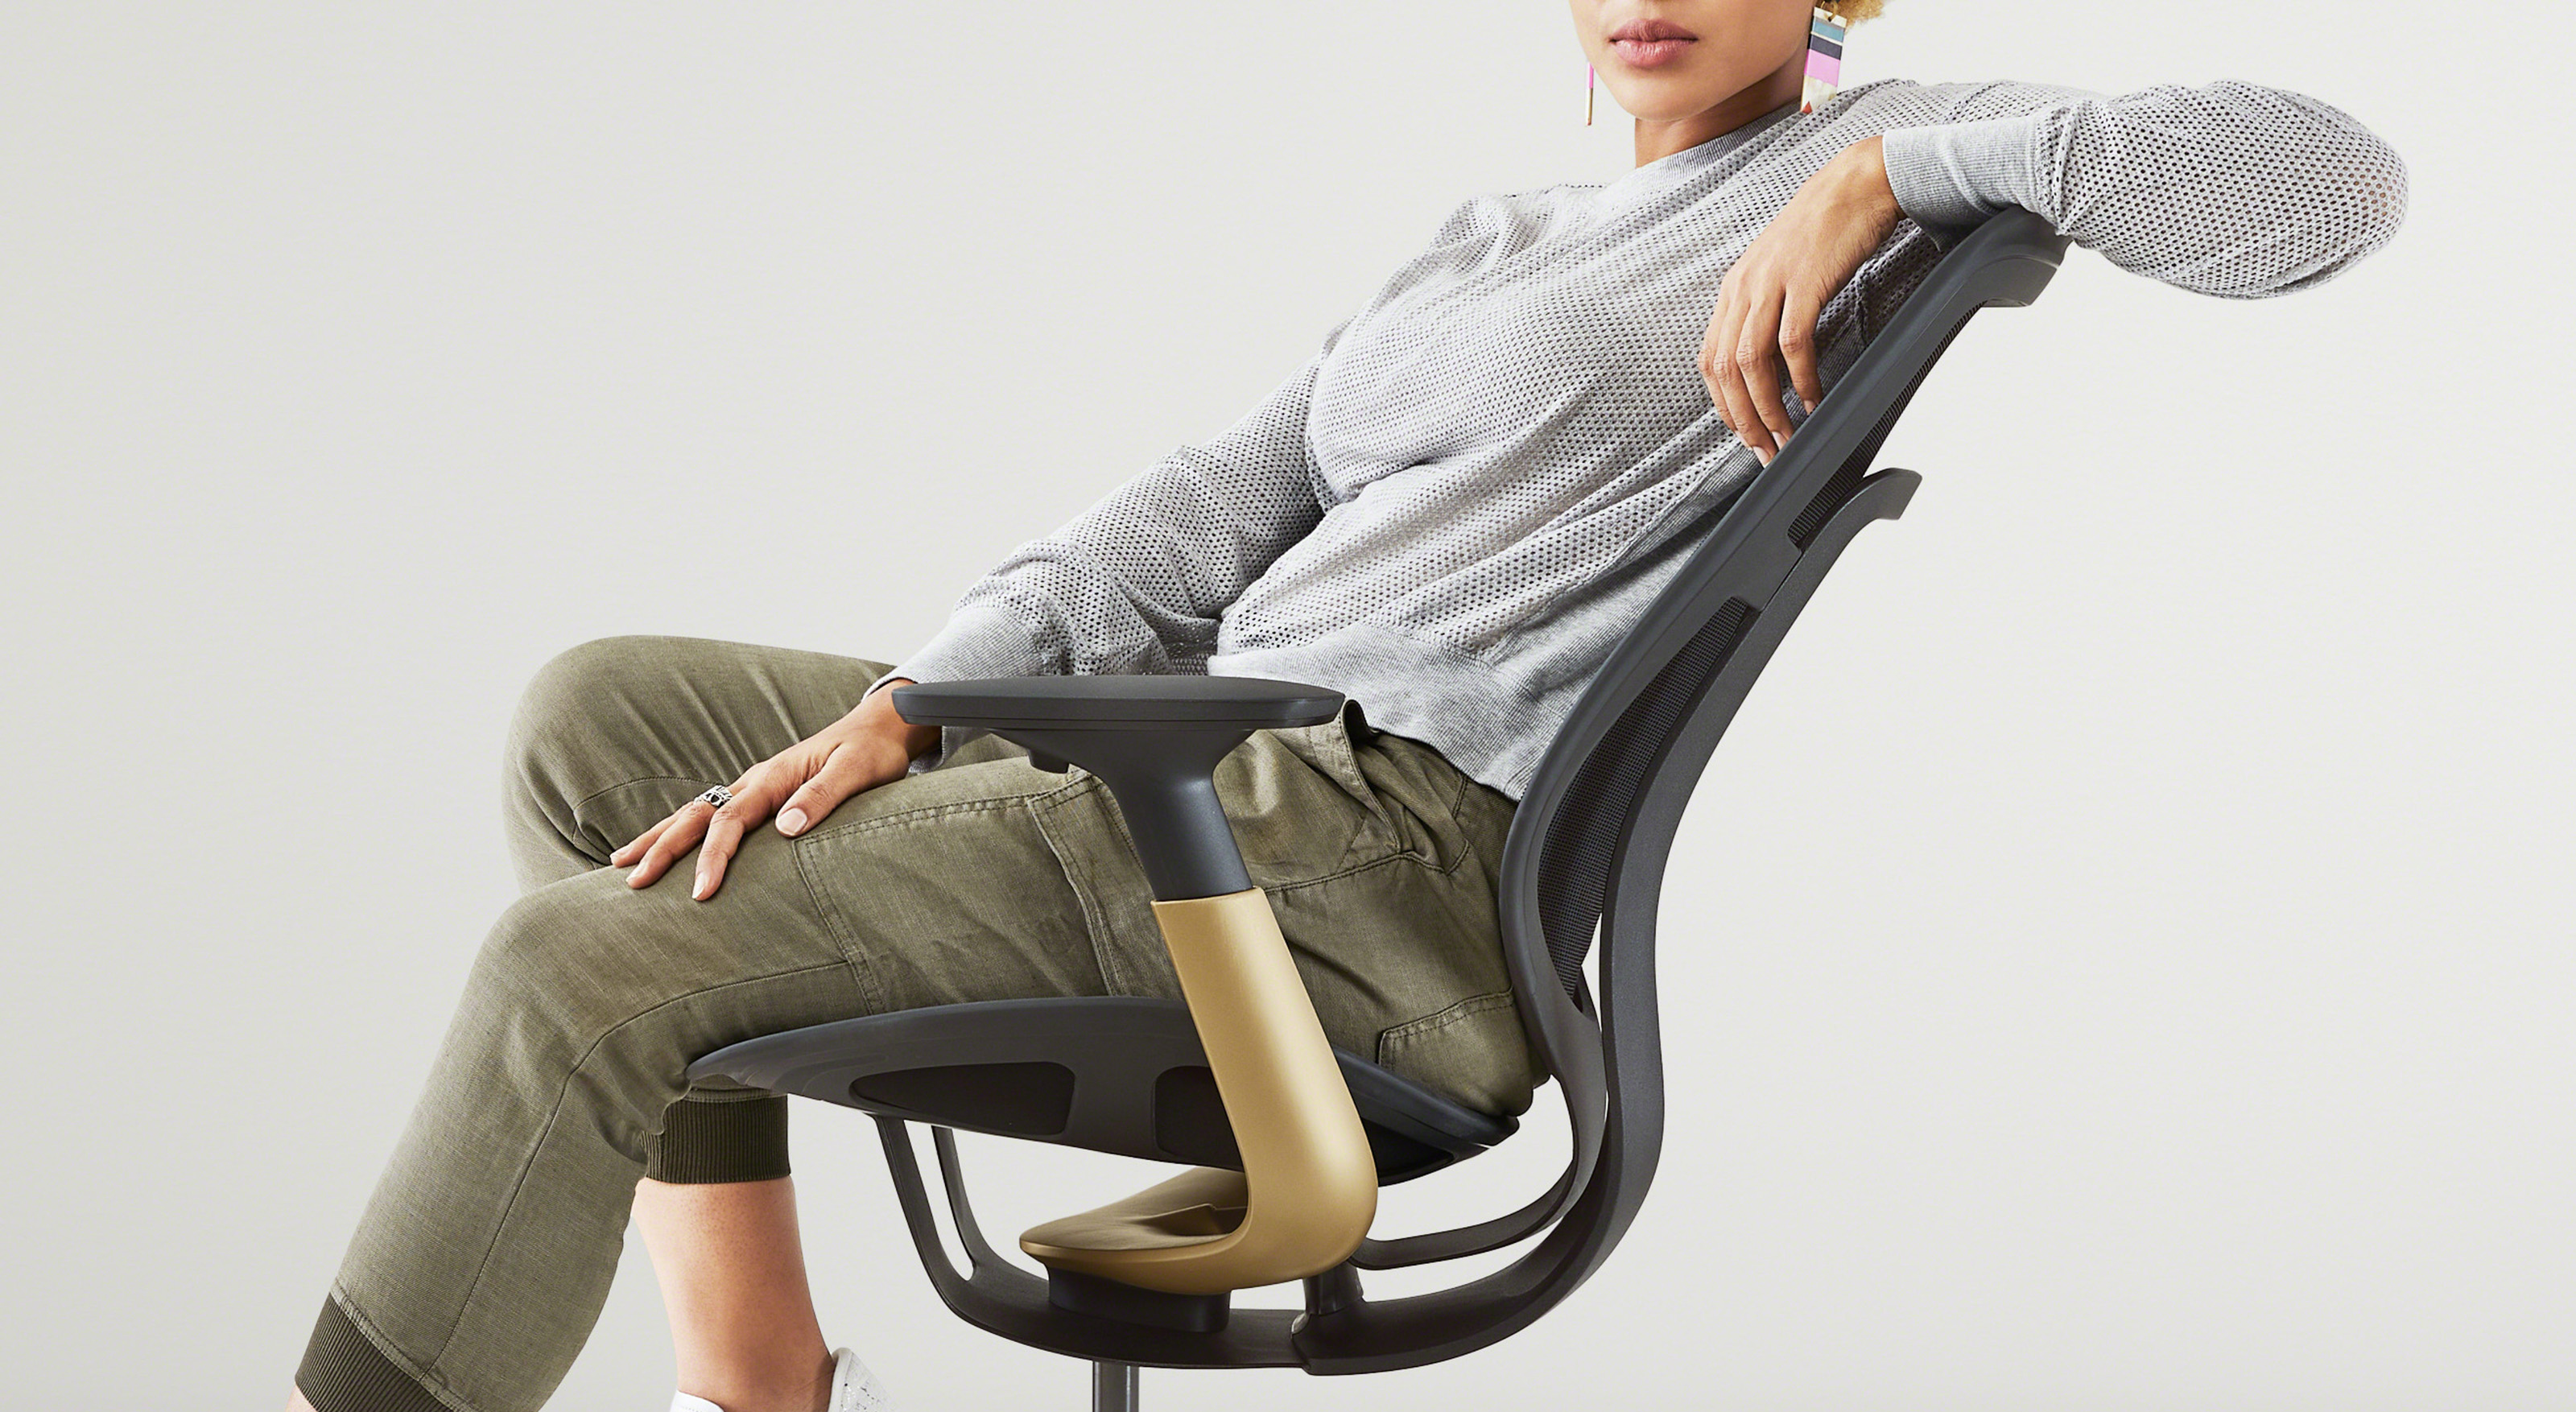 Tired of Sitting in Your Dining Room Chair? - Steelcase